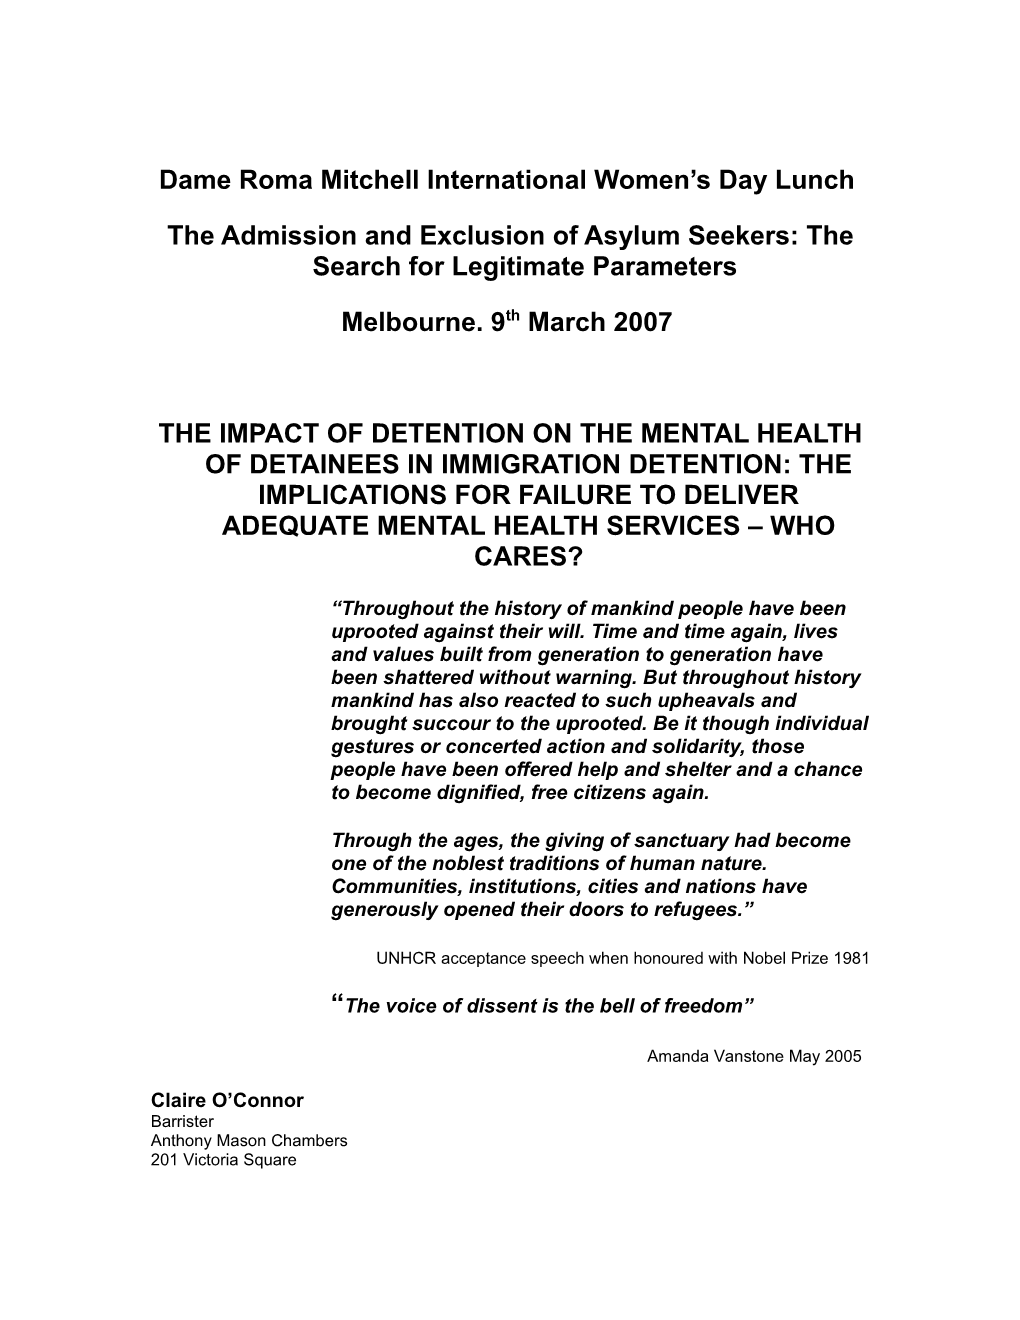 The Impact of Detention on the Mental Health of Detainees in Immigration Detention: The